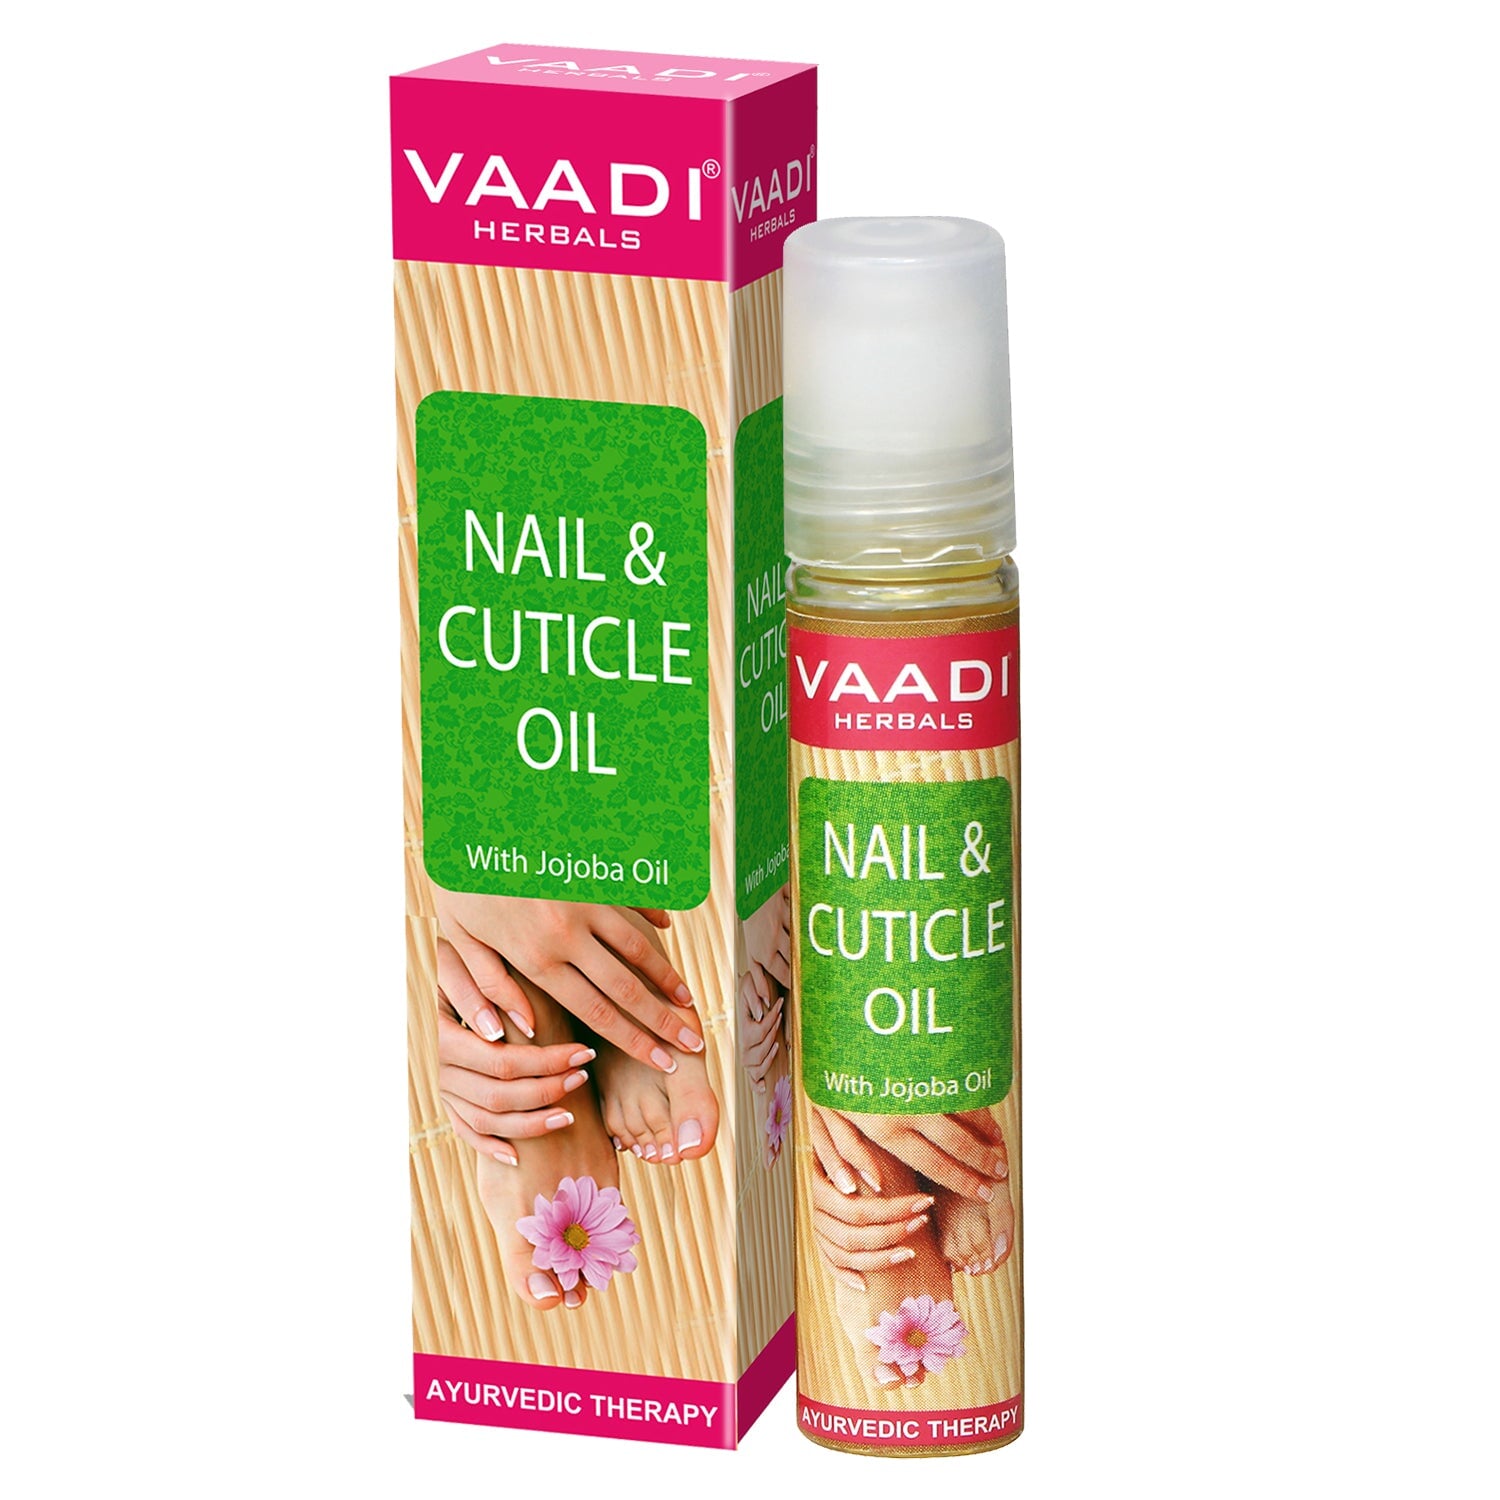 Organic Nail & Cuticle Oil with Jojoba Oil - Heals Redness & Pain - Strengthens Thin & Brittle Nails (10 ml/ 0.4 fl oz)